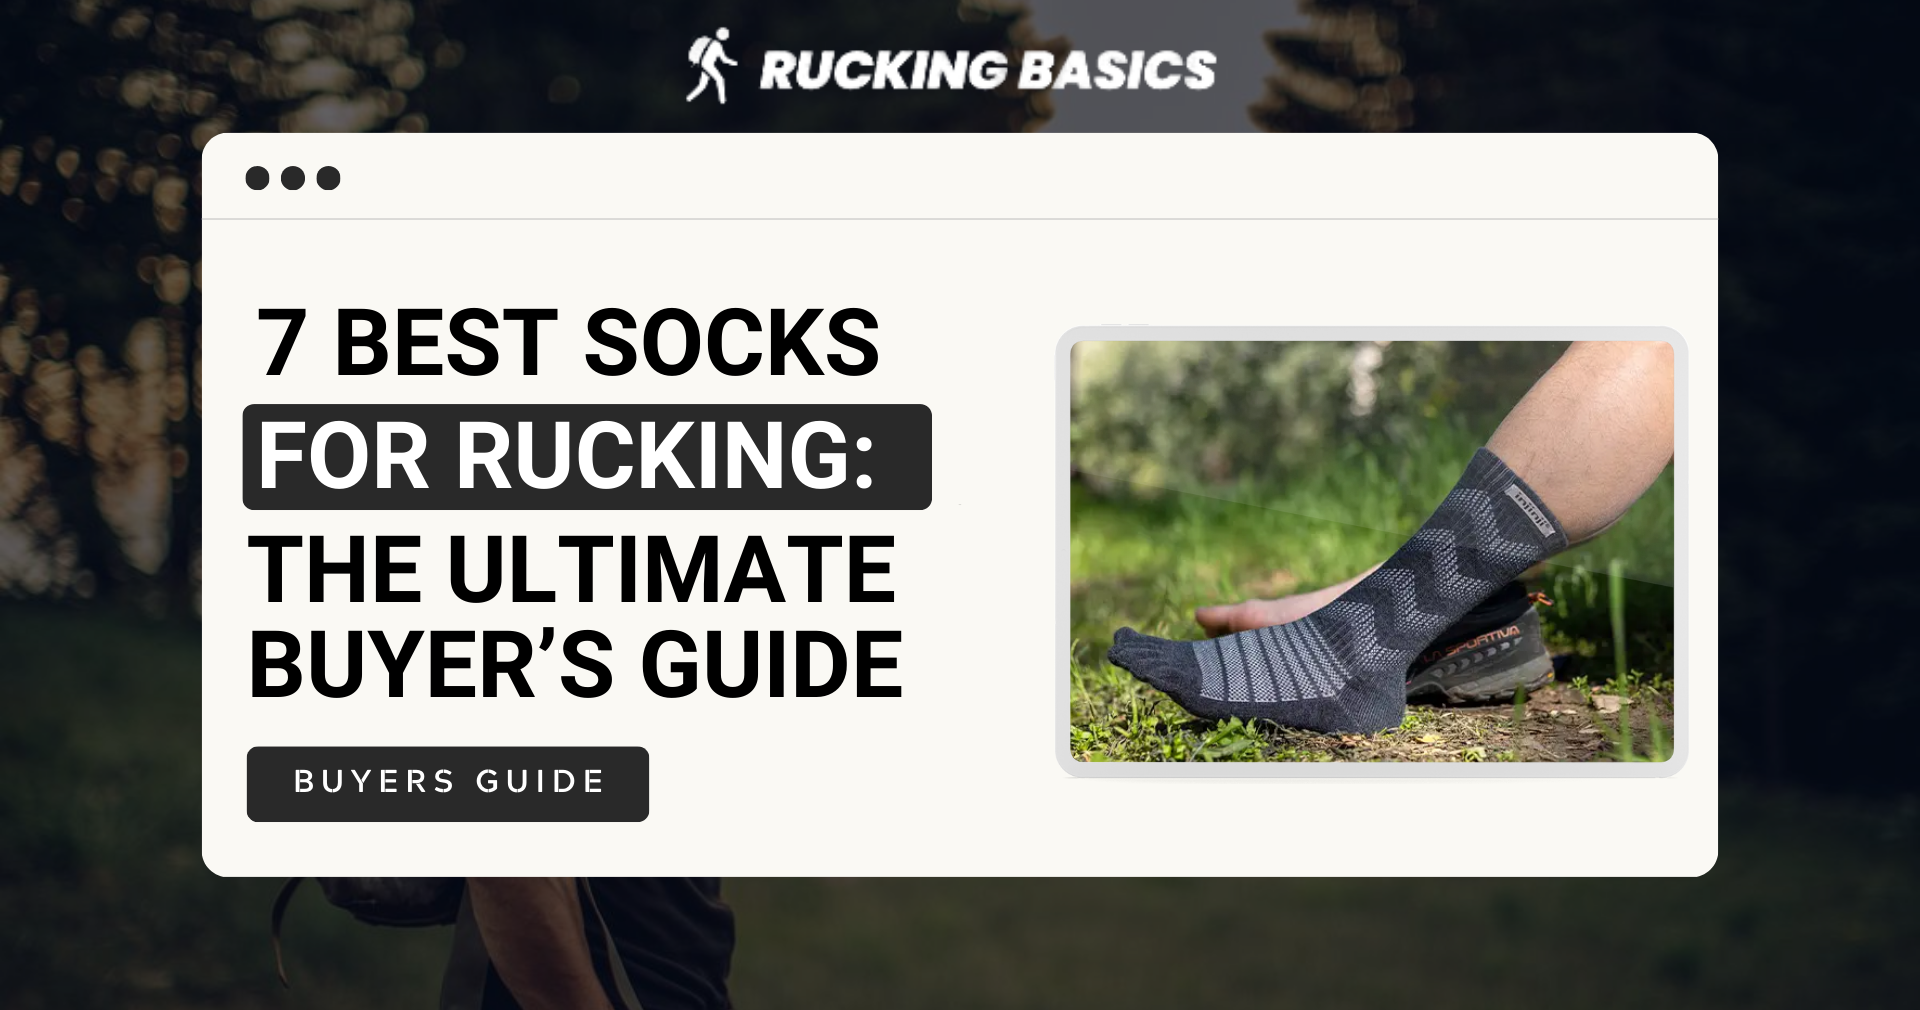 7 Best Socks for Rucking: The Ultimate Buyer's Guide